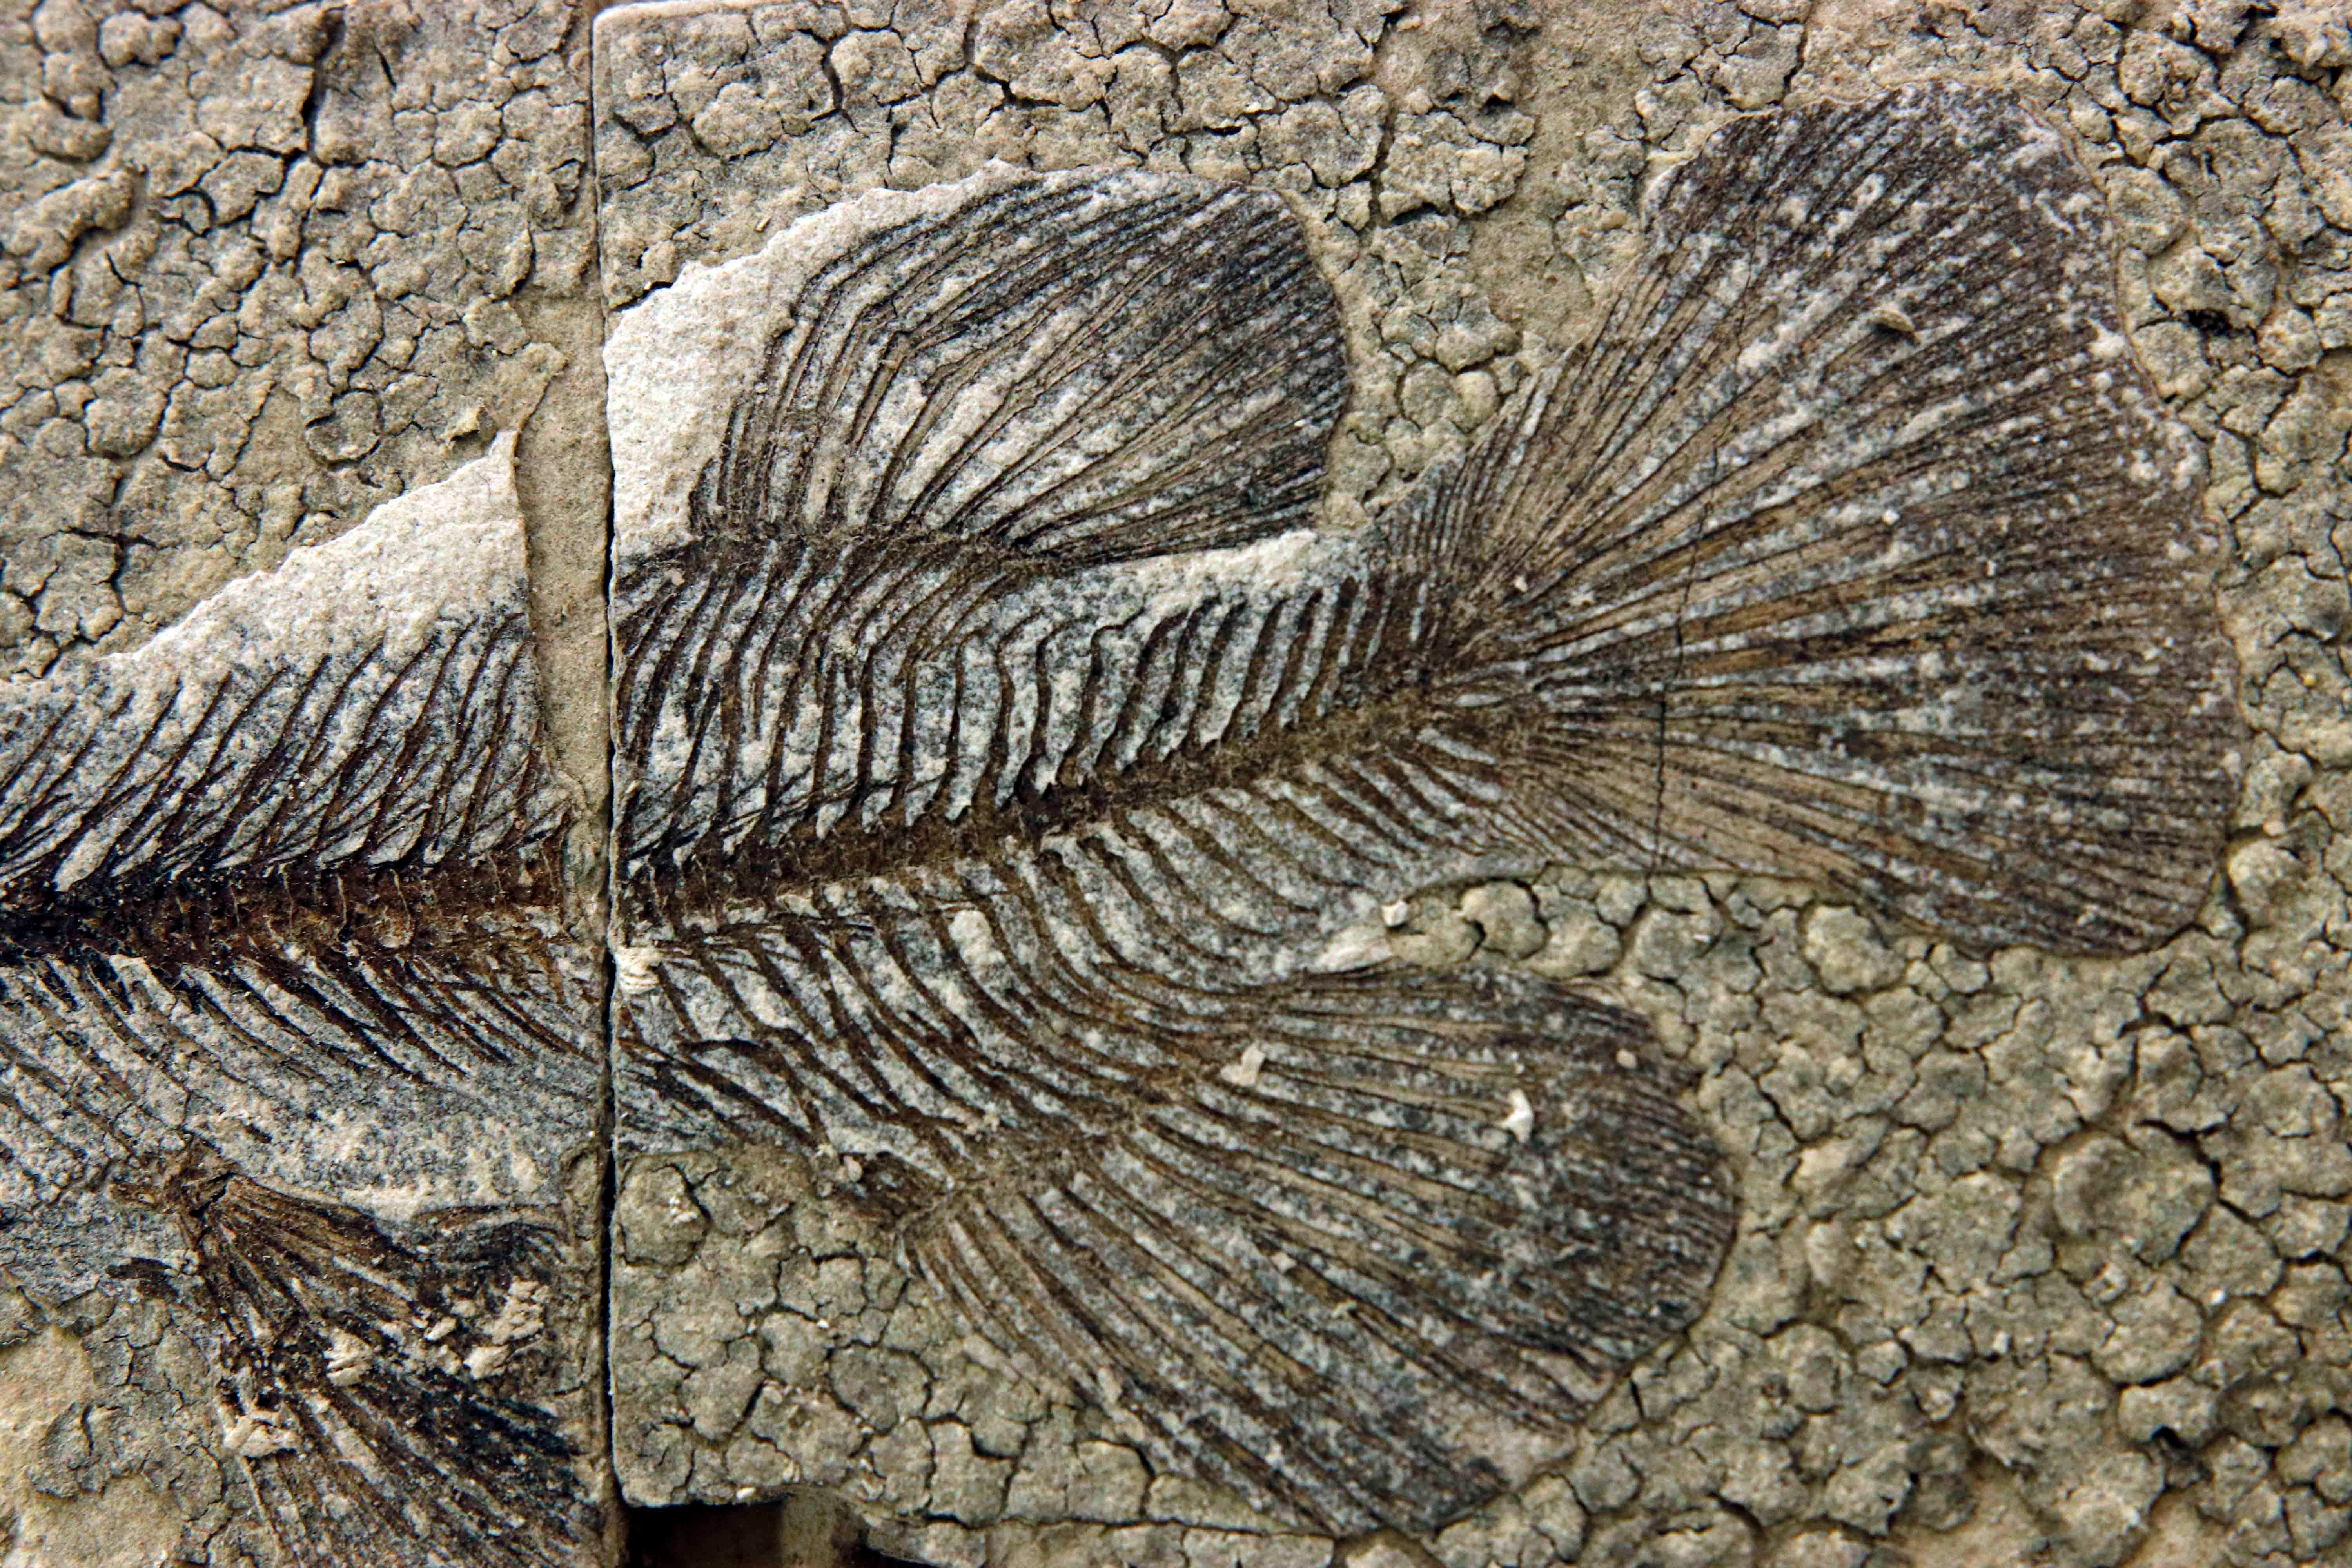 Exquisite Fossils Show an Entire Rain Forest Ecosystem - Scientific American